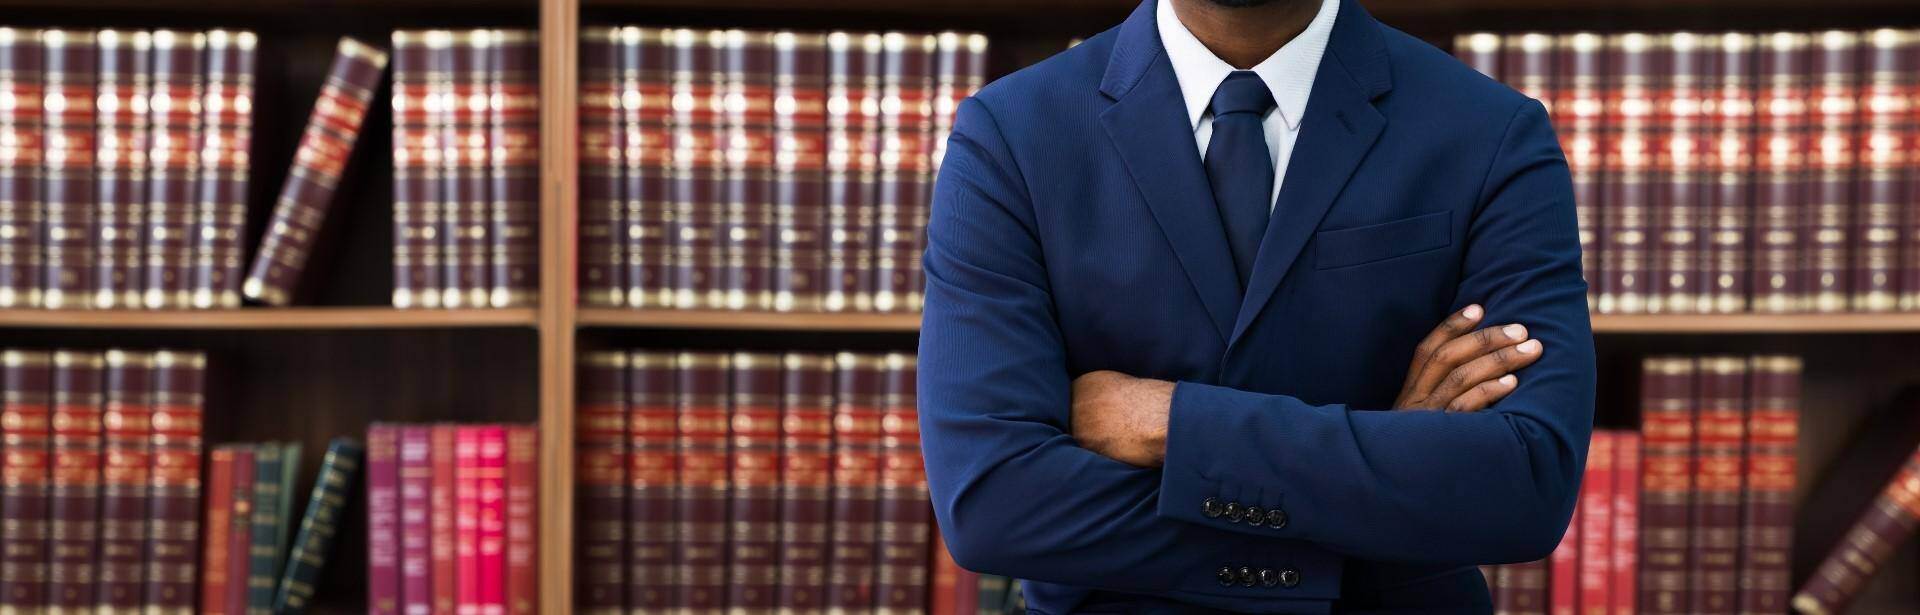 A black lawyer standing in front of a bookshelf of law book in Rome, Georgia